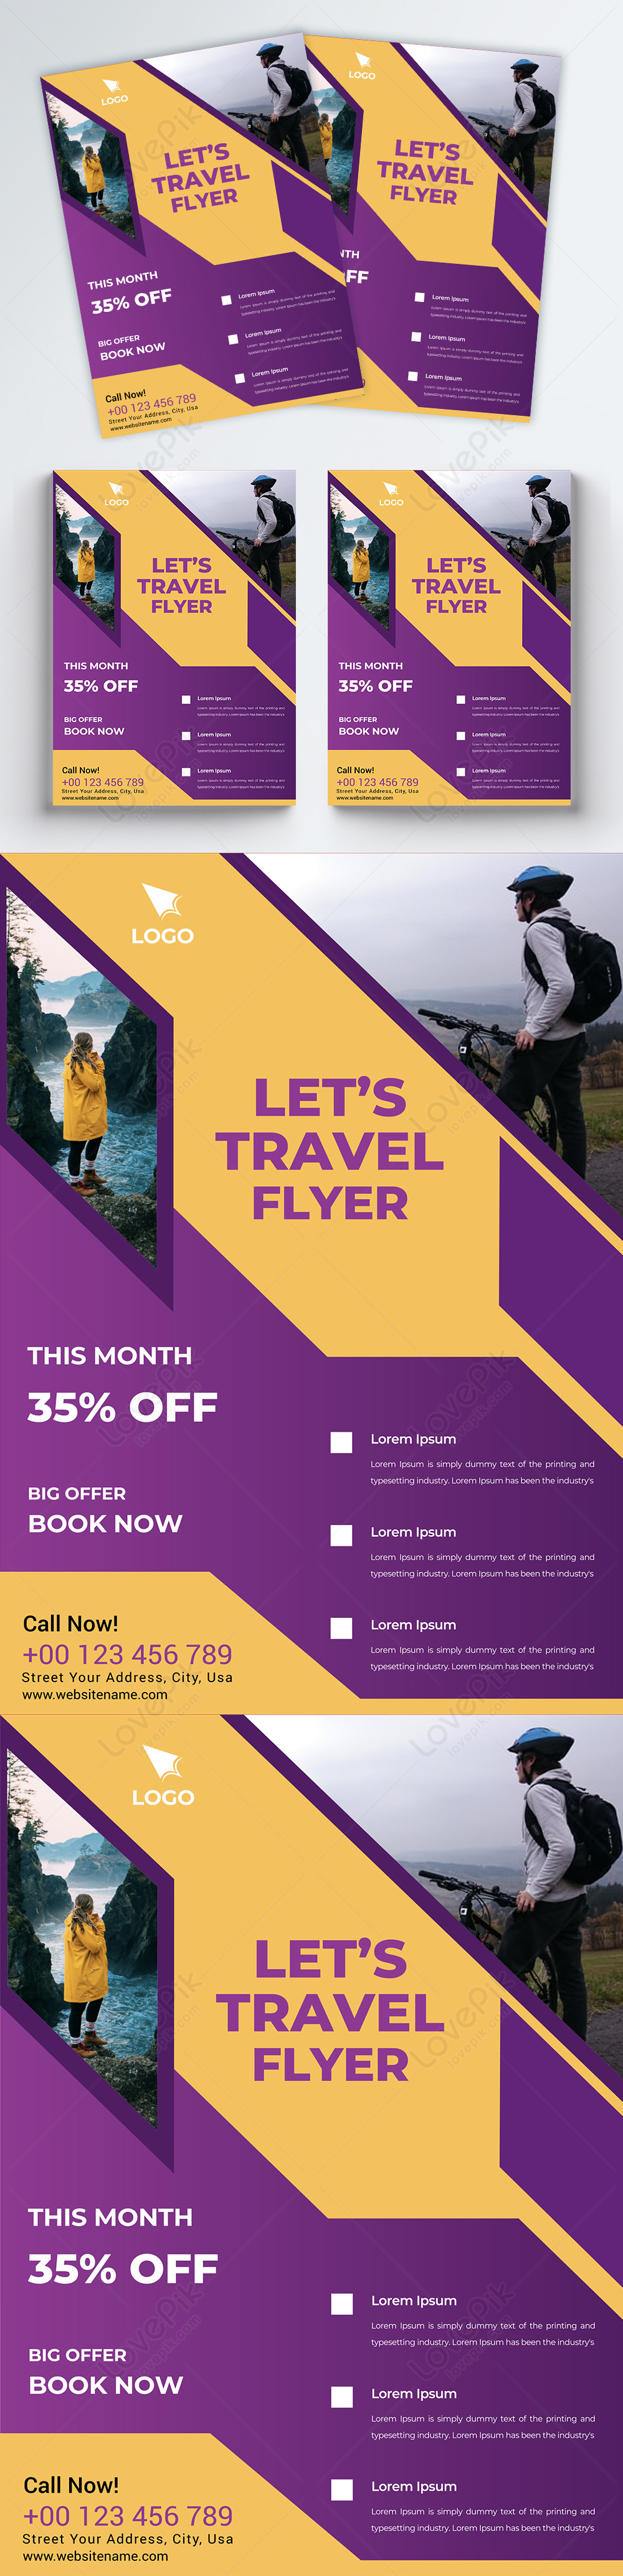 travel-flyer-template-image-picture-free-download-450110778-lovepik